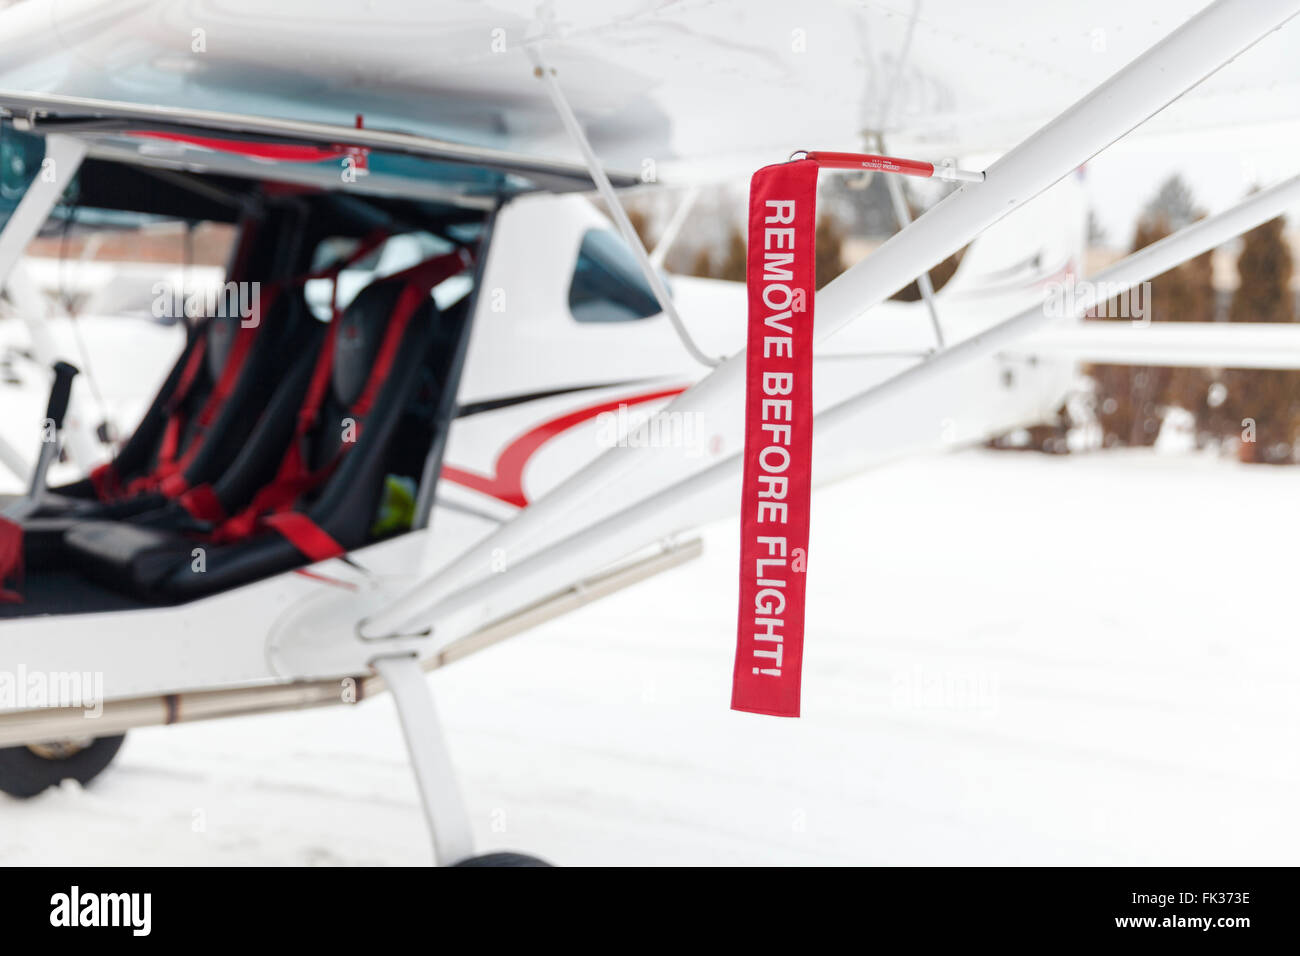 remove before flight, on small airplane close up Stock Photo